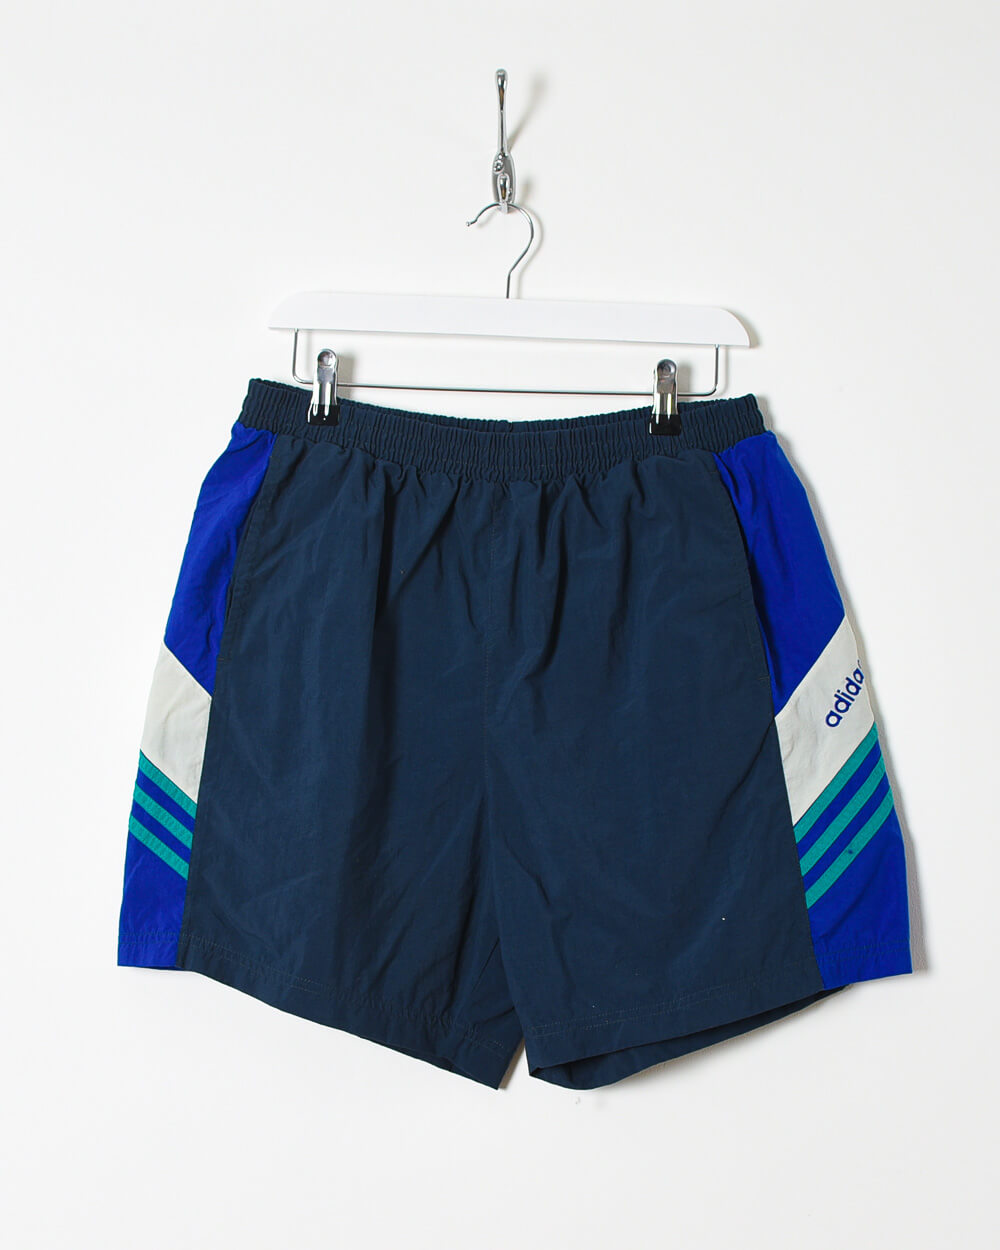 Adidas Shorts - W32 L17 - Domno Vintage 90s, 80s, 00s Retro and Vintage Clothing